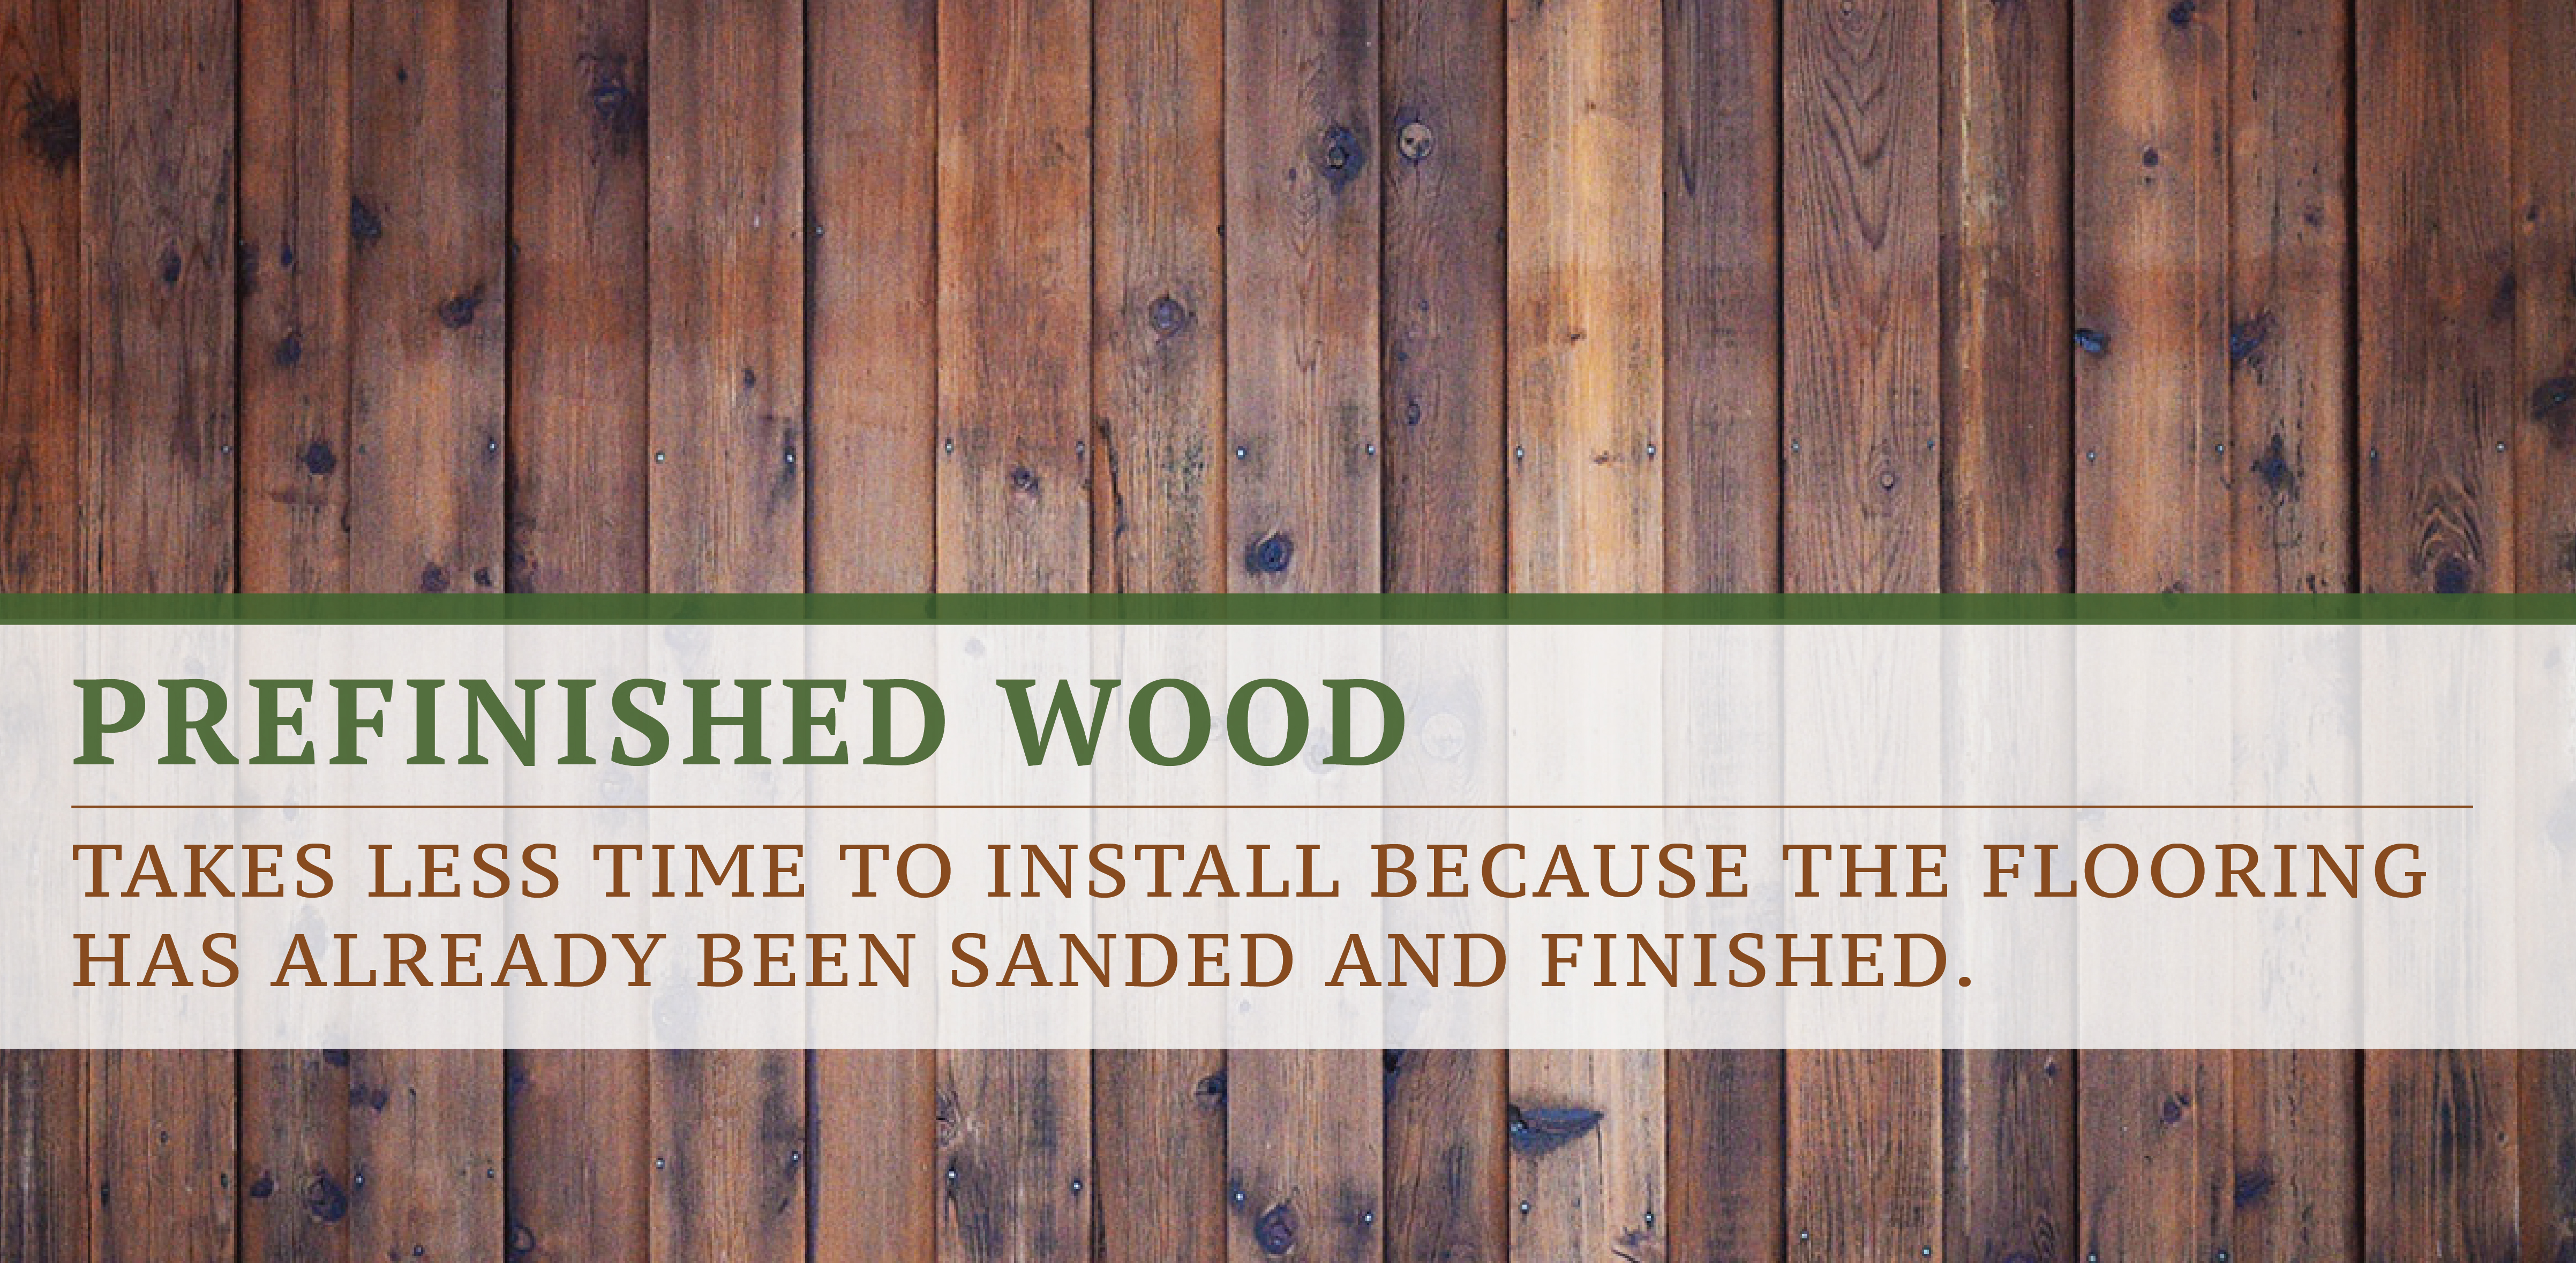 Prefinished Wood Flooring Faster to Install